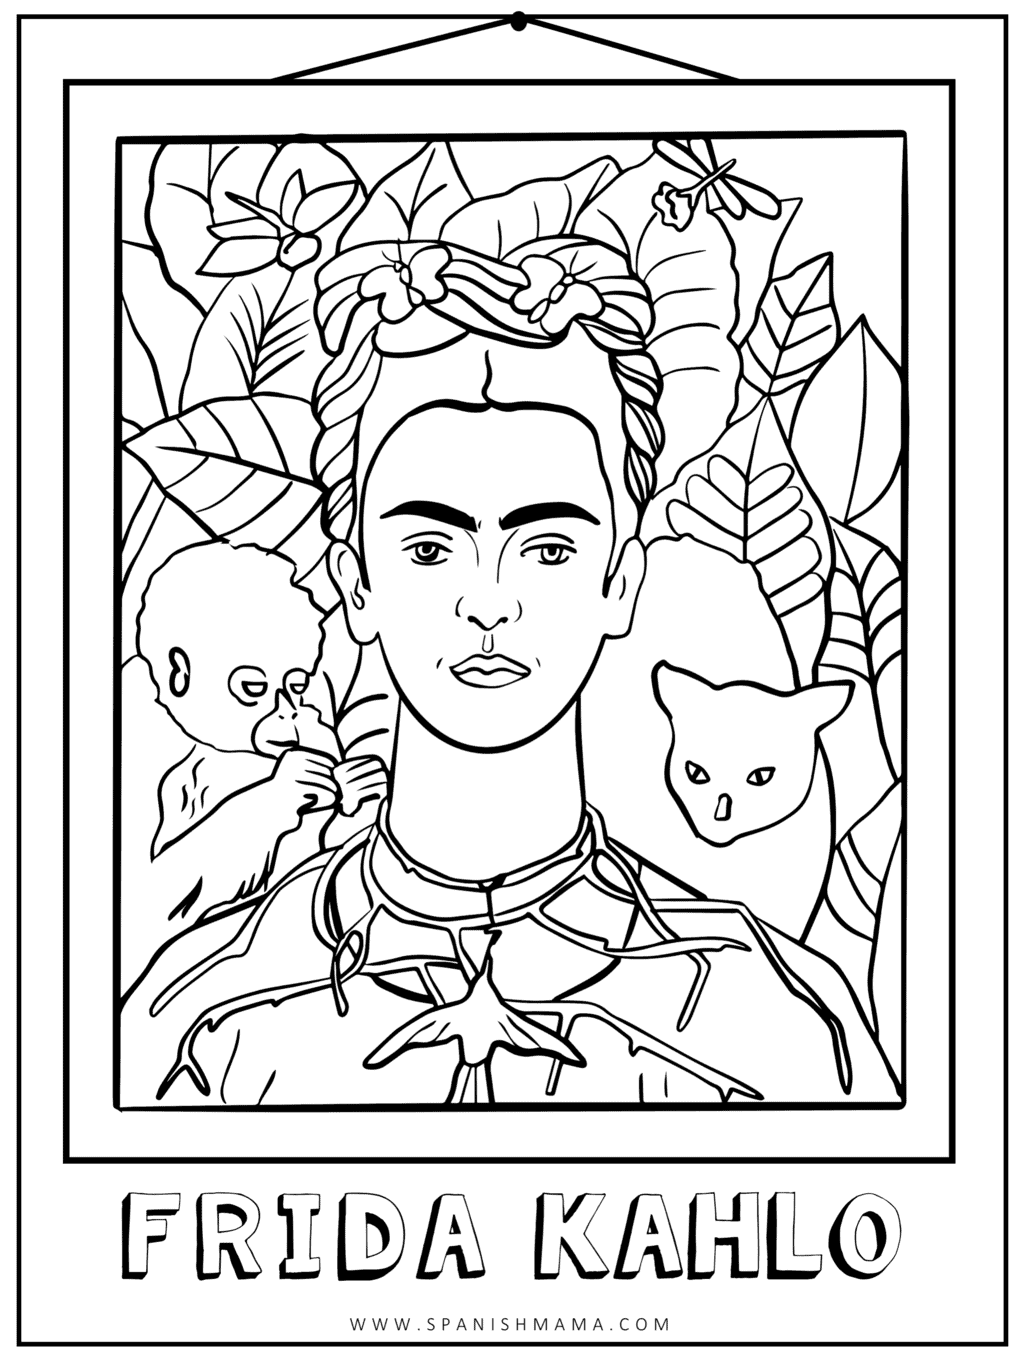 Frida Kahlo Art for Kid Projects, Printables, and Biographies